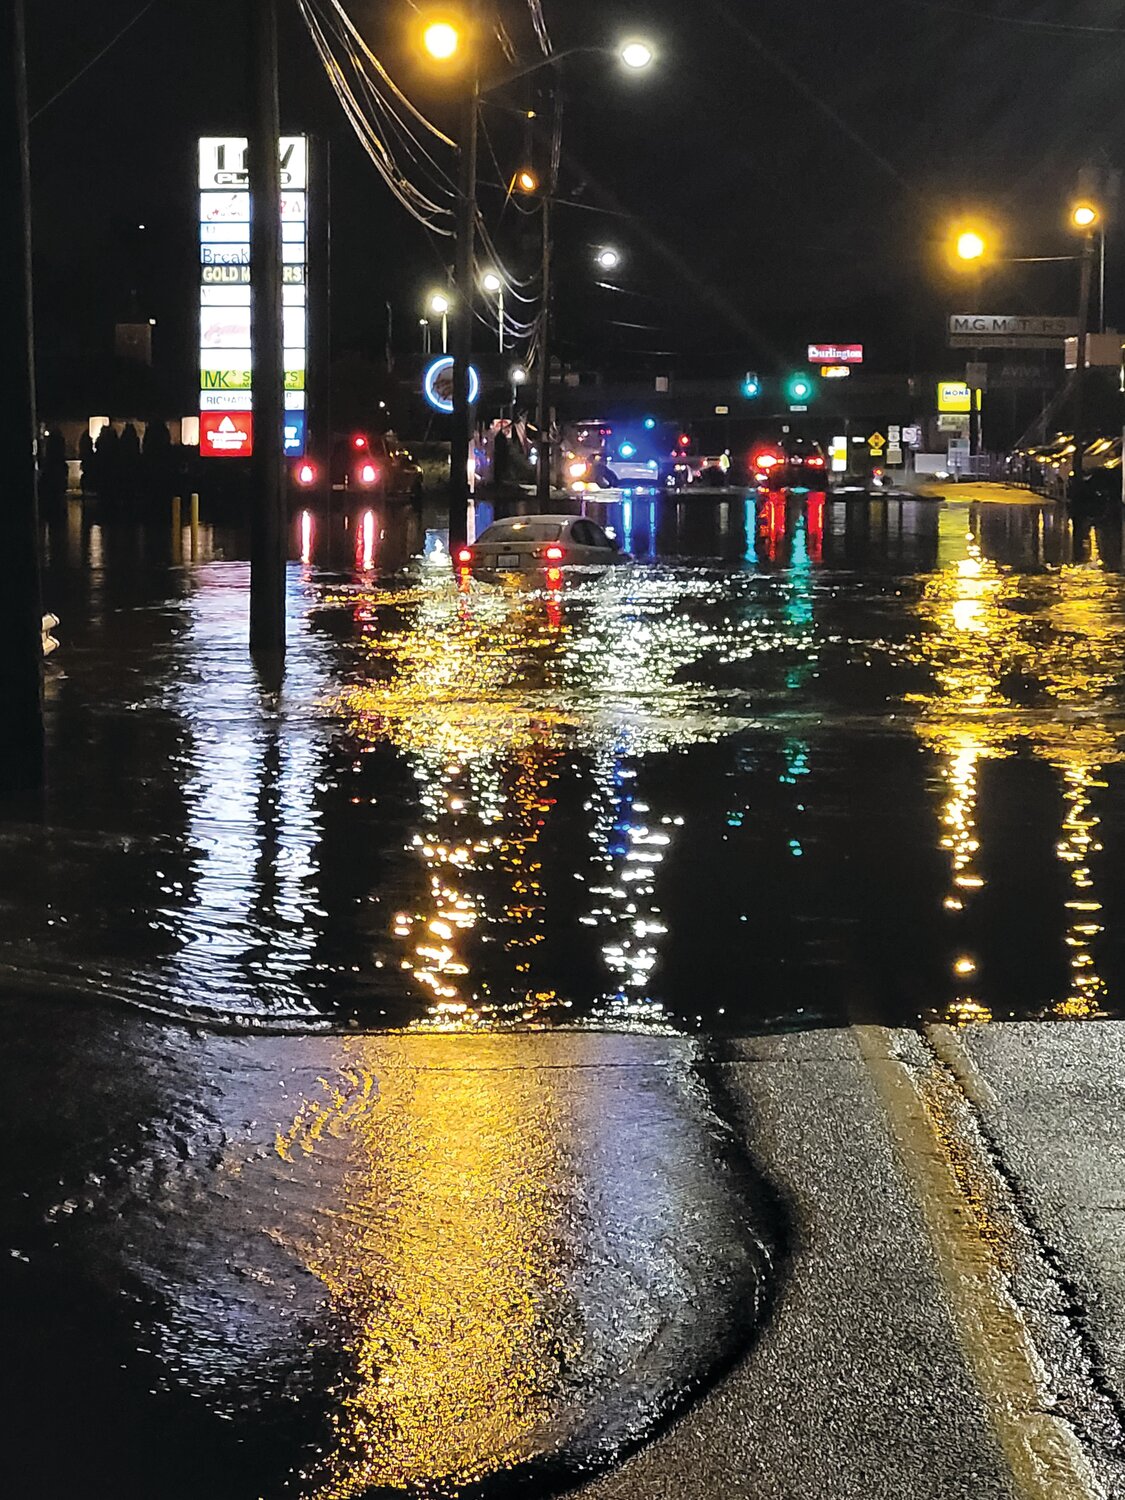 LIKE A BOBBER: Later Monday night, a stranded vehicle continued to float around a flooded Atwood Avenue as the waters rose, but tow trucks were unable to reach it until the waters receded.